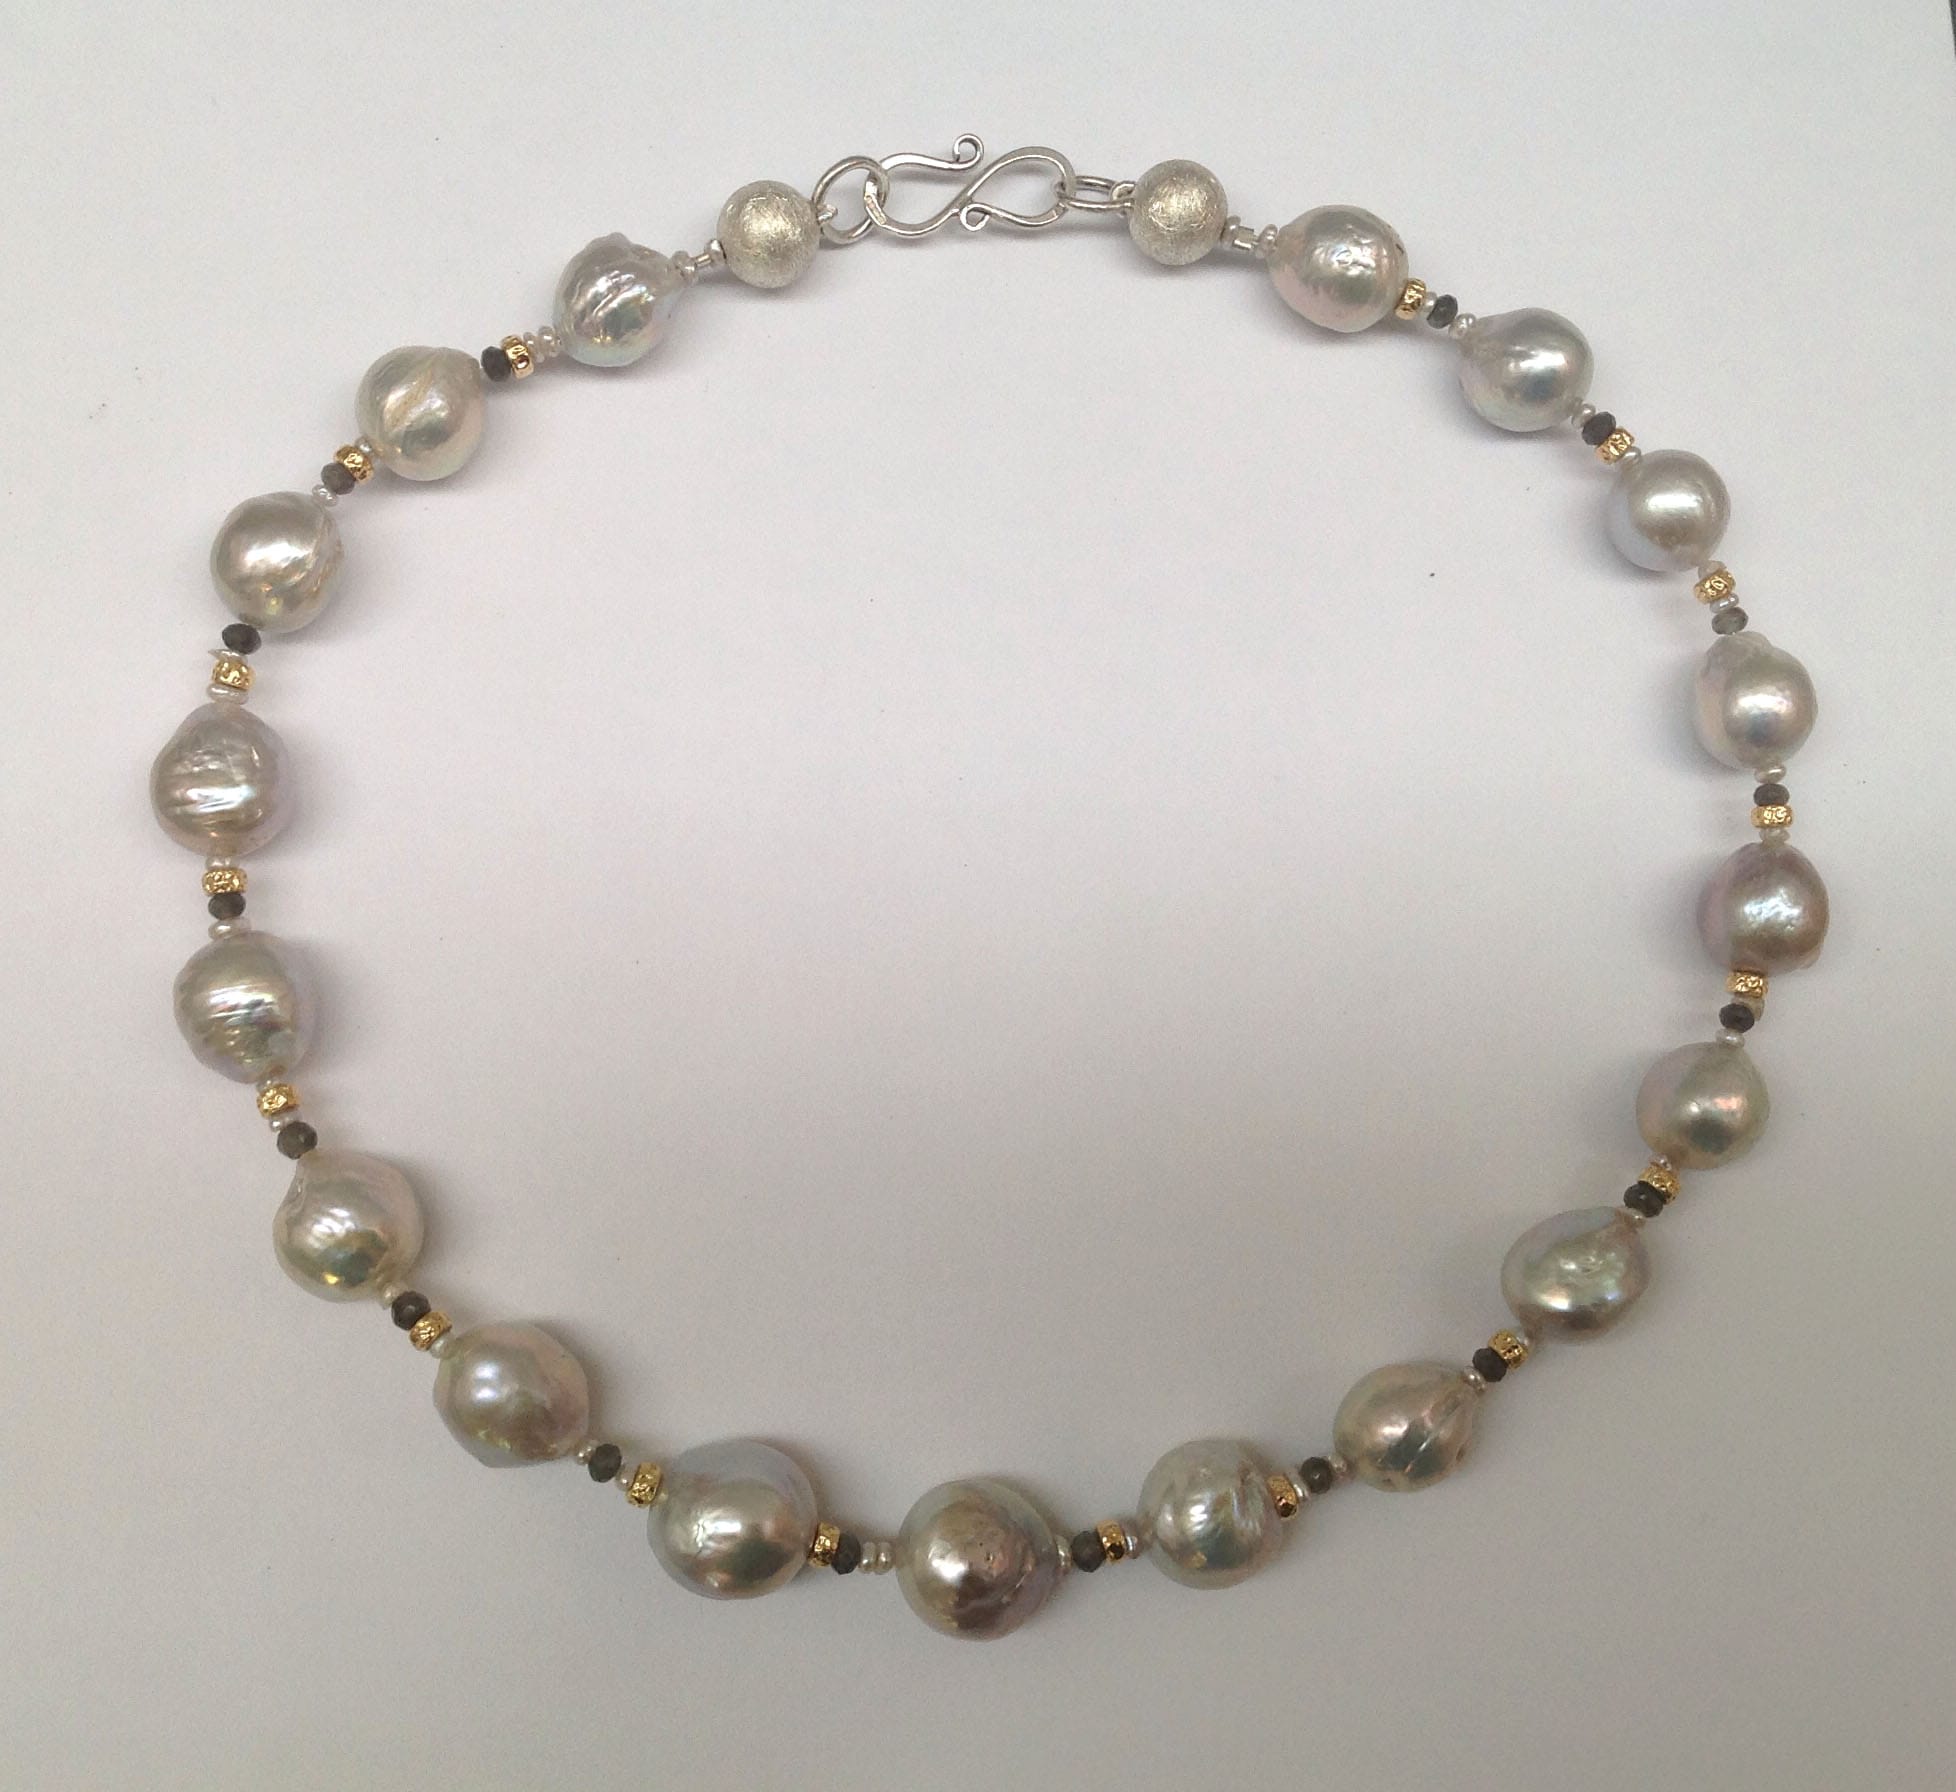 Silver grey freshwater pearls, grey quartz, 18 carat yellow gold beads, sterling silver clasp